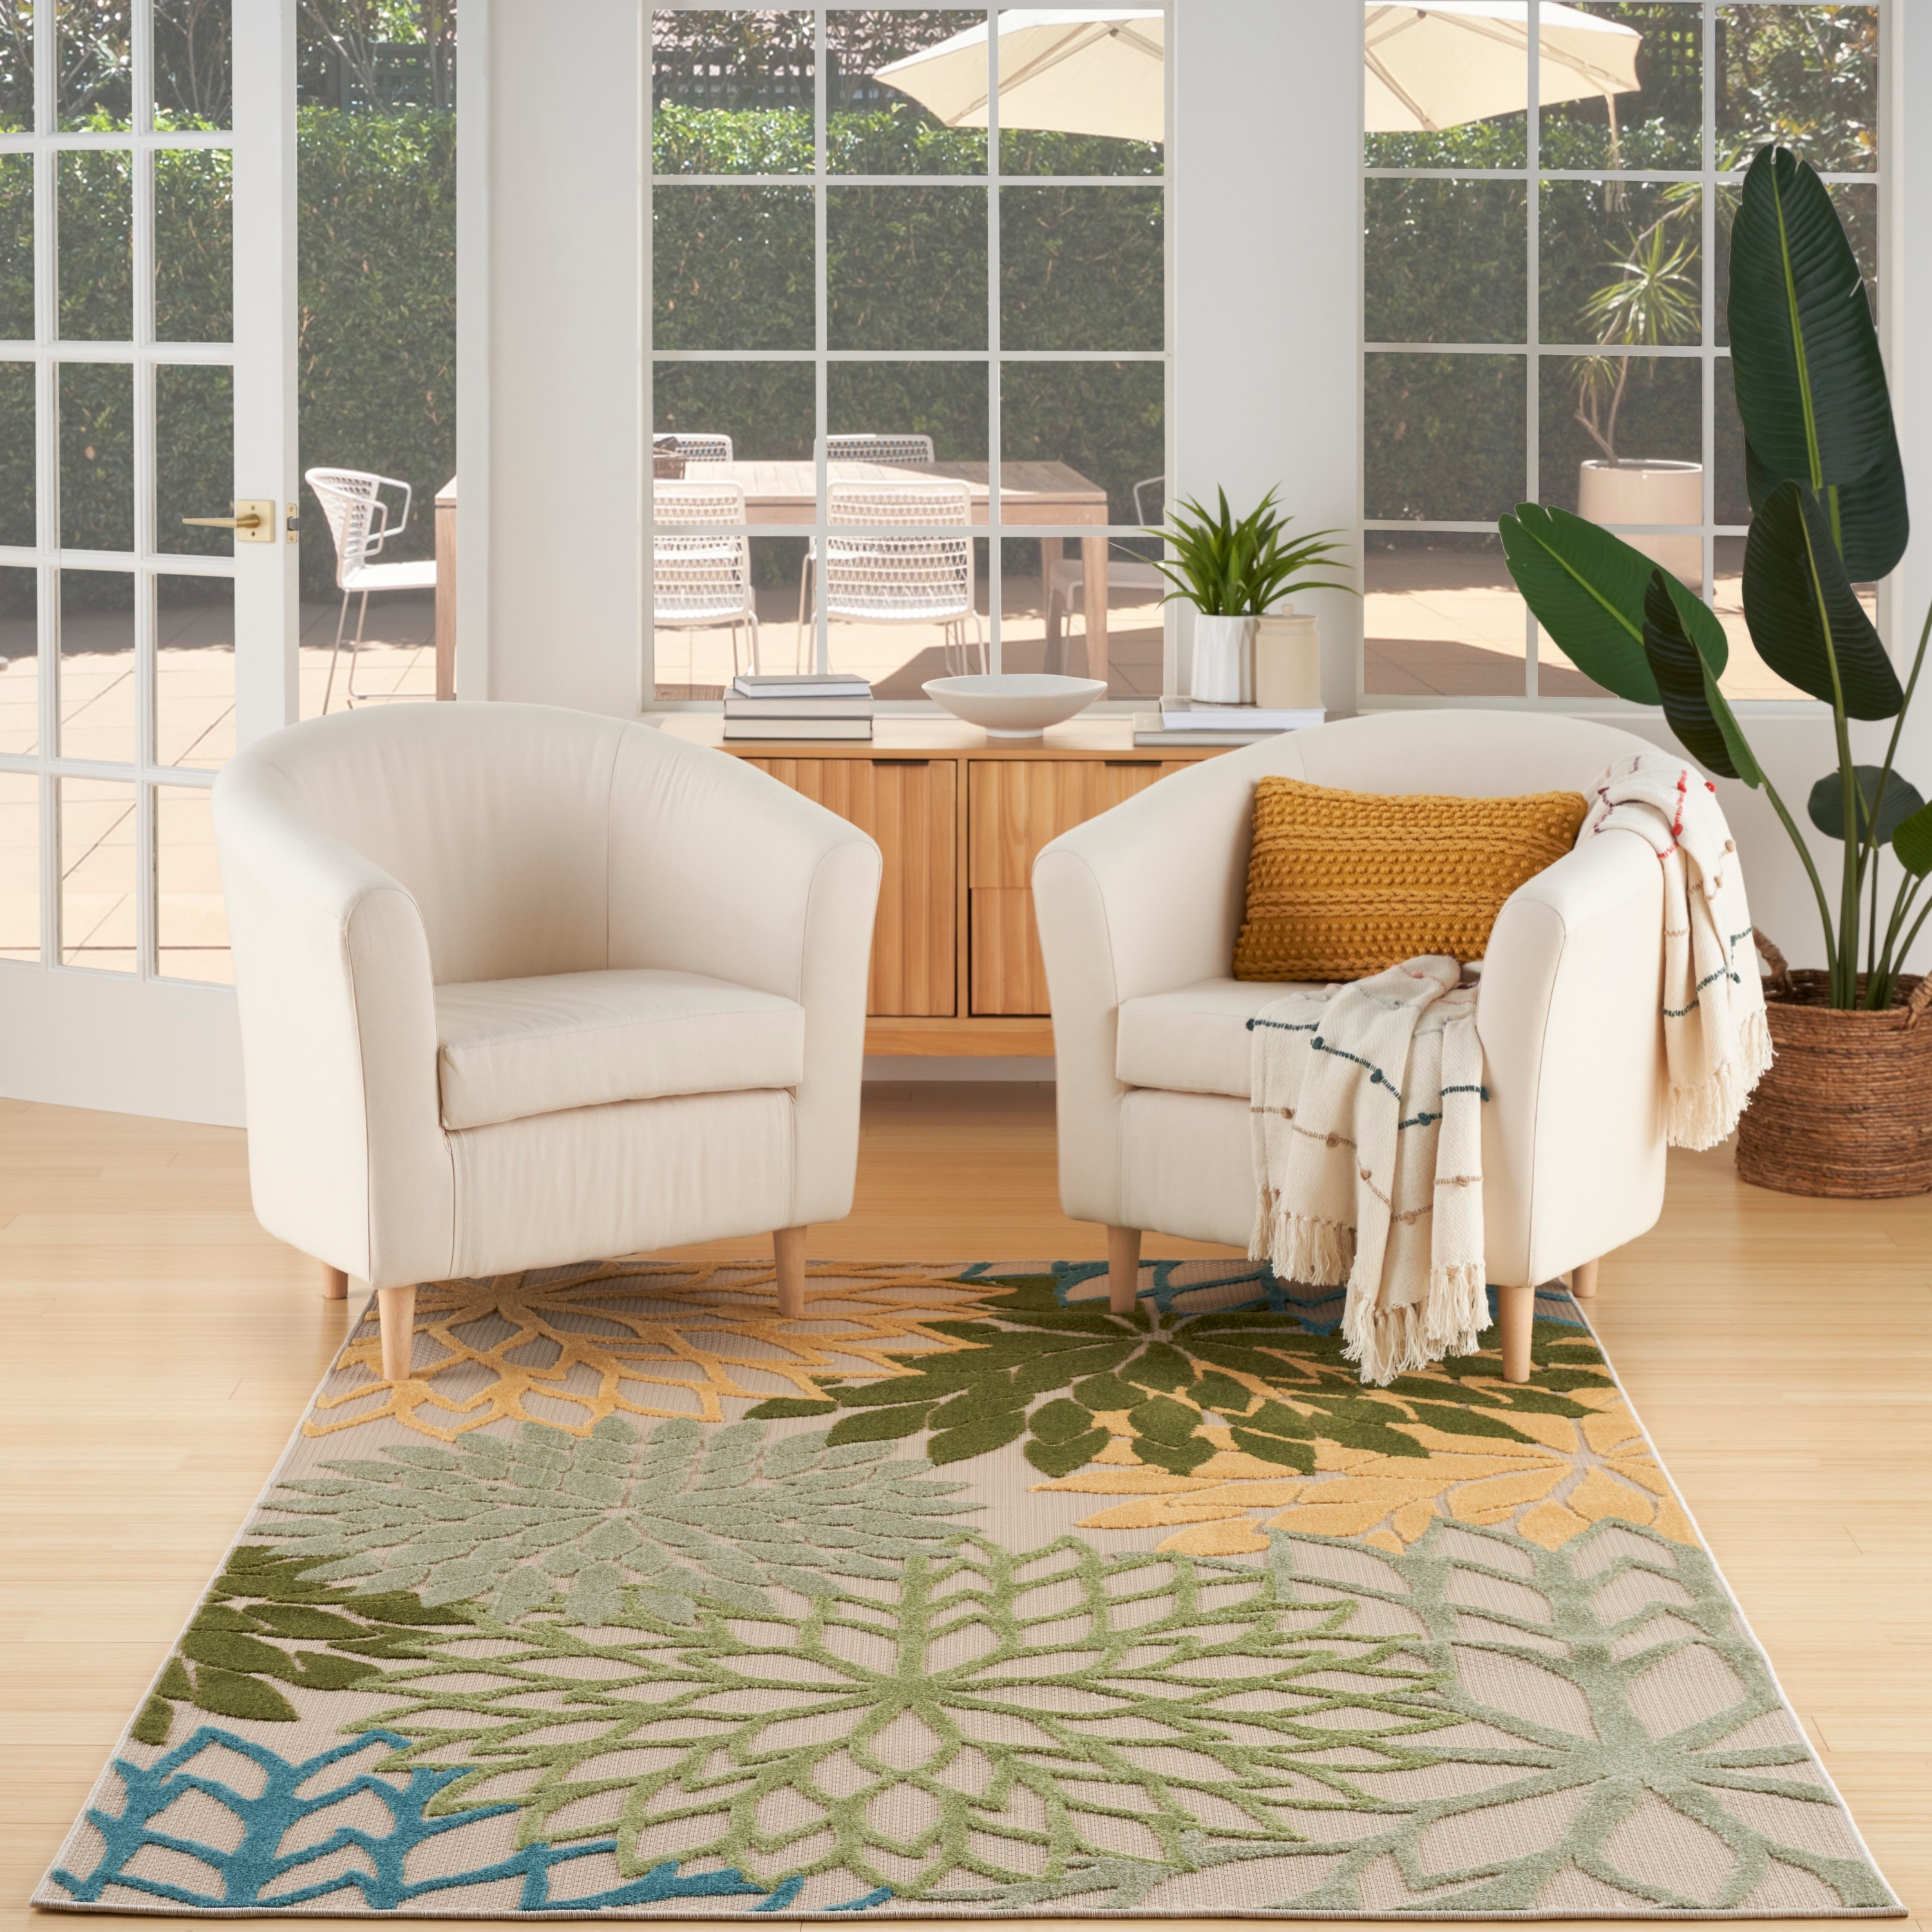 https://ak1.ostkcdn.com/images/products/is/images/direct/db6b65d1acc801c18a58bd0329515aee2795cd16/Nourison-Aloha-Floral-Modern-Indoor-Outdoor-Area-Rug.jpg